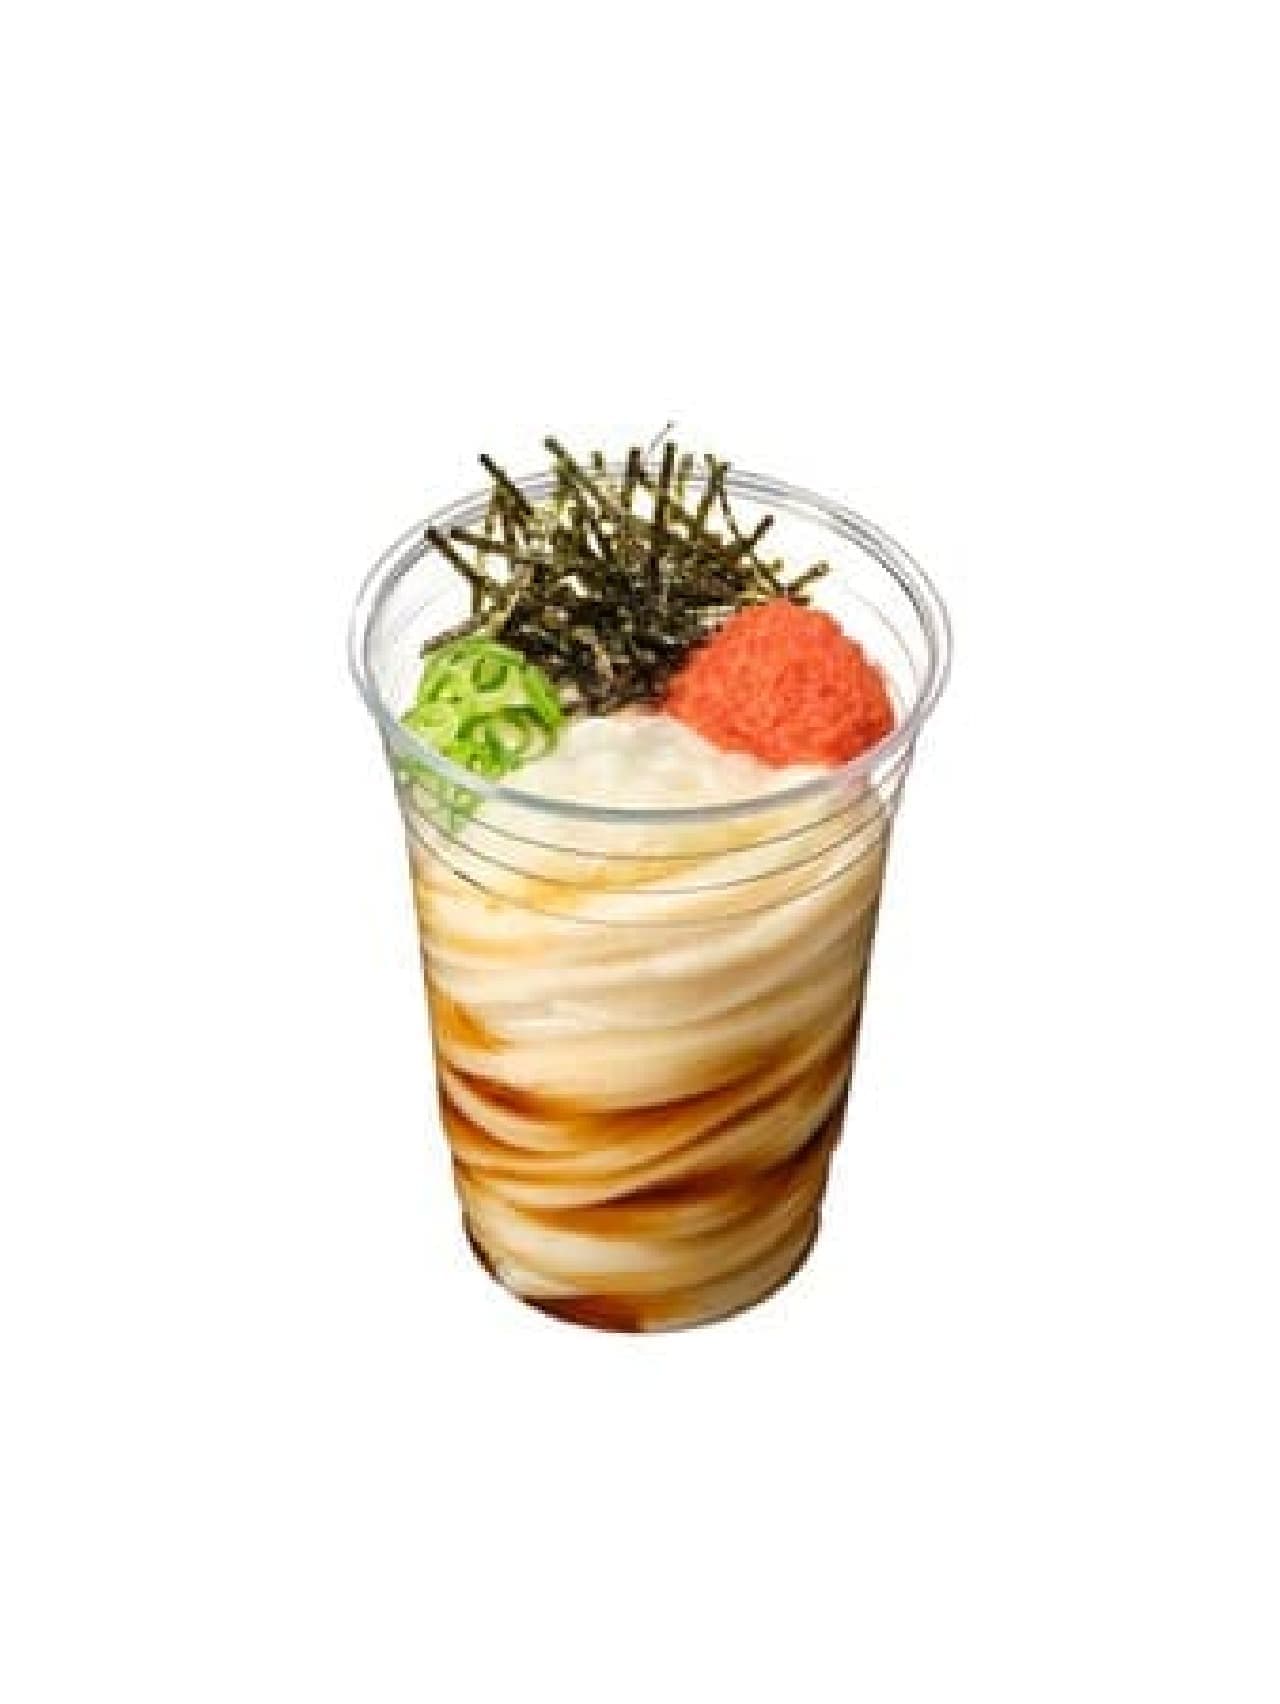 Marugame Shake Udon" from Marugame Seimen: To go to be enjoyed by wiping it on! 5 kinds including grated ume plum, mentaiko grated yam, sesame sauce salad, etc.